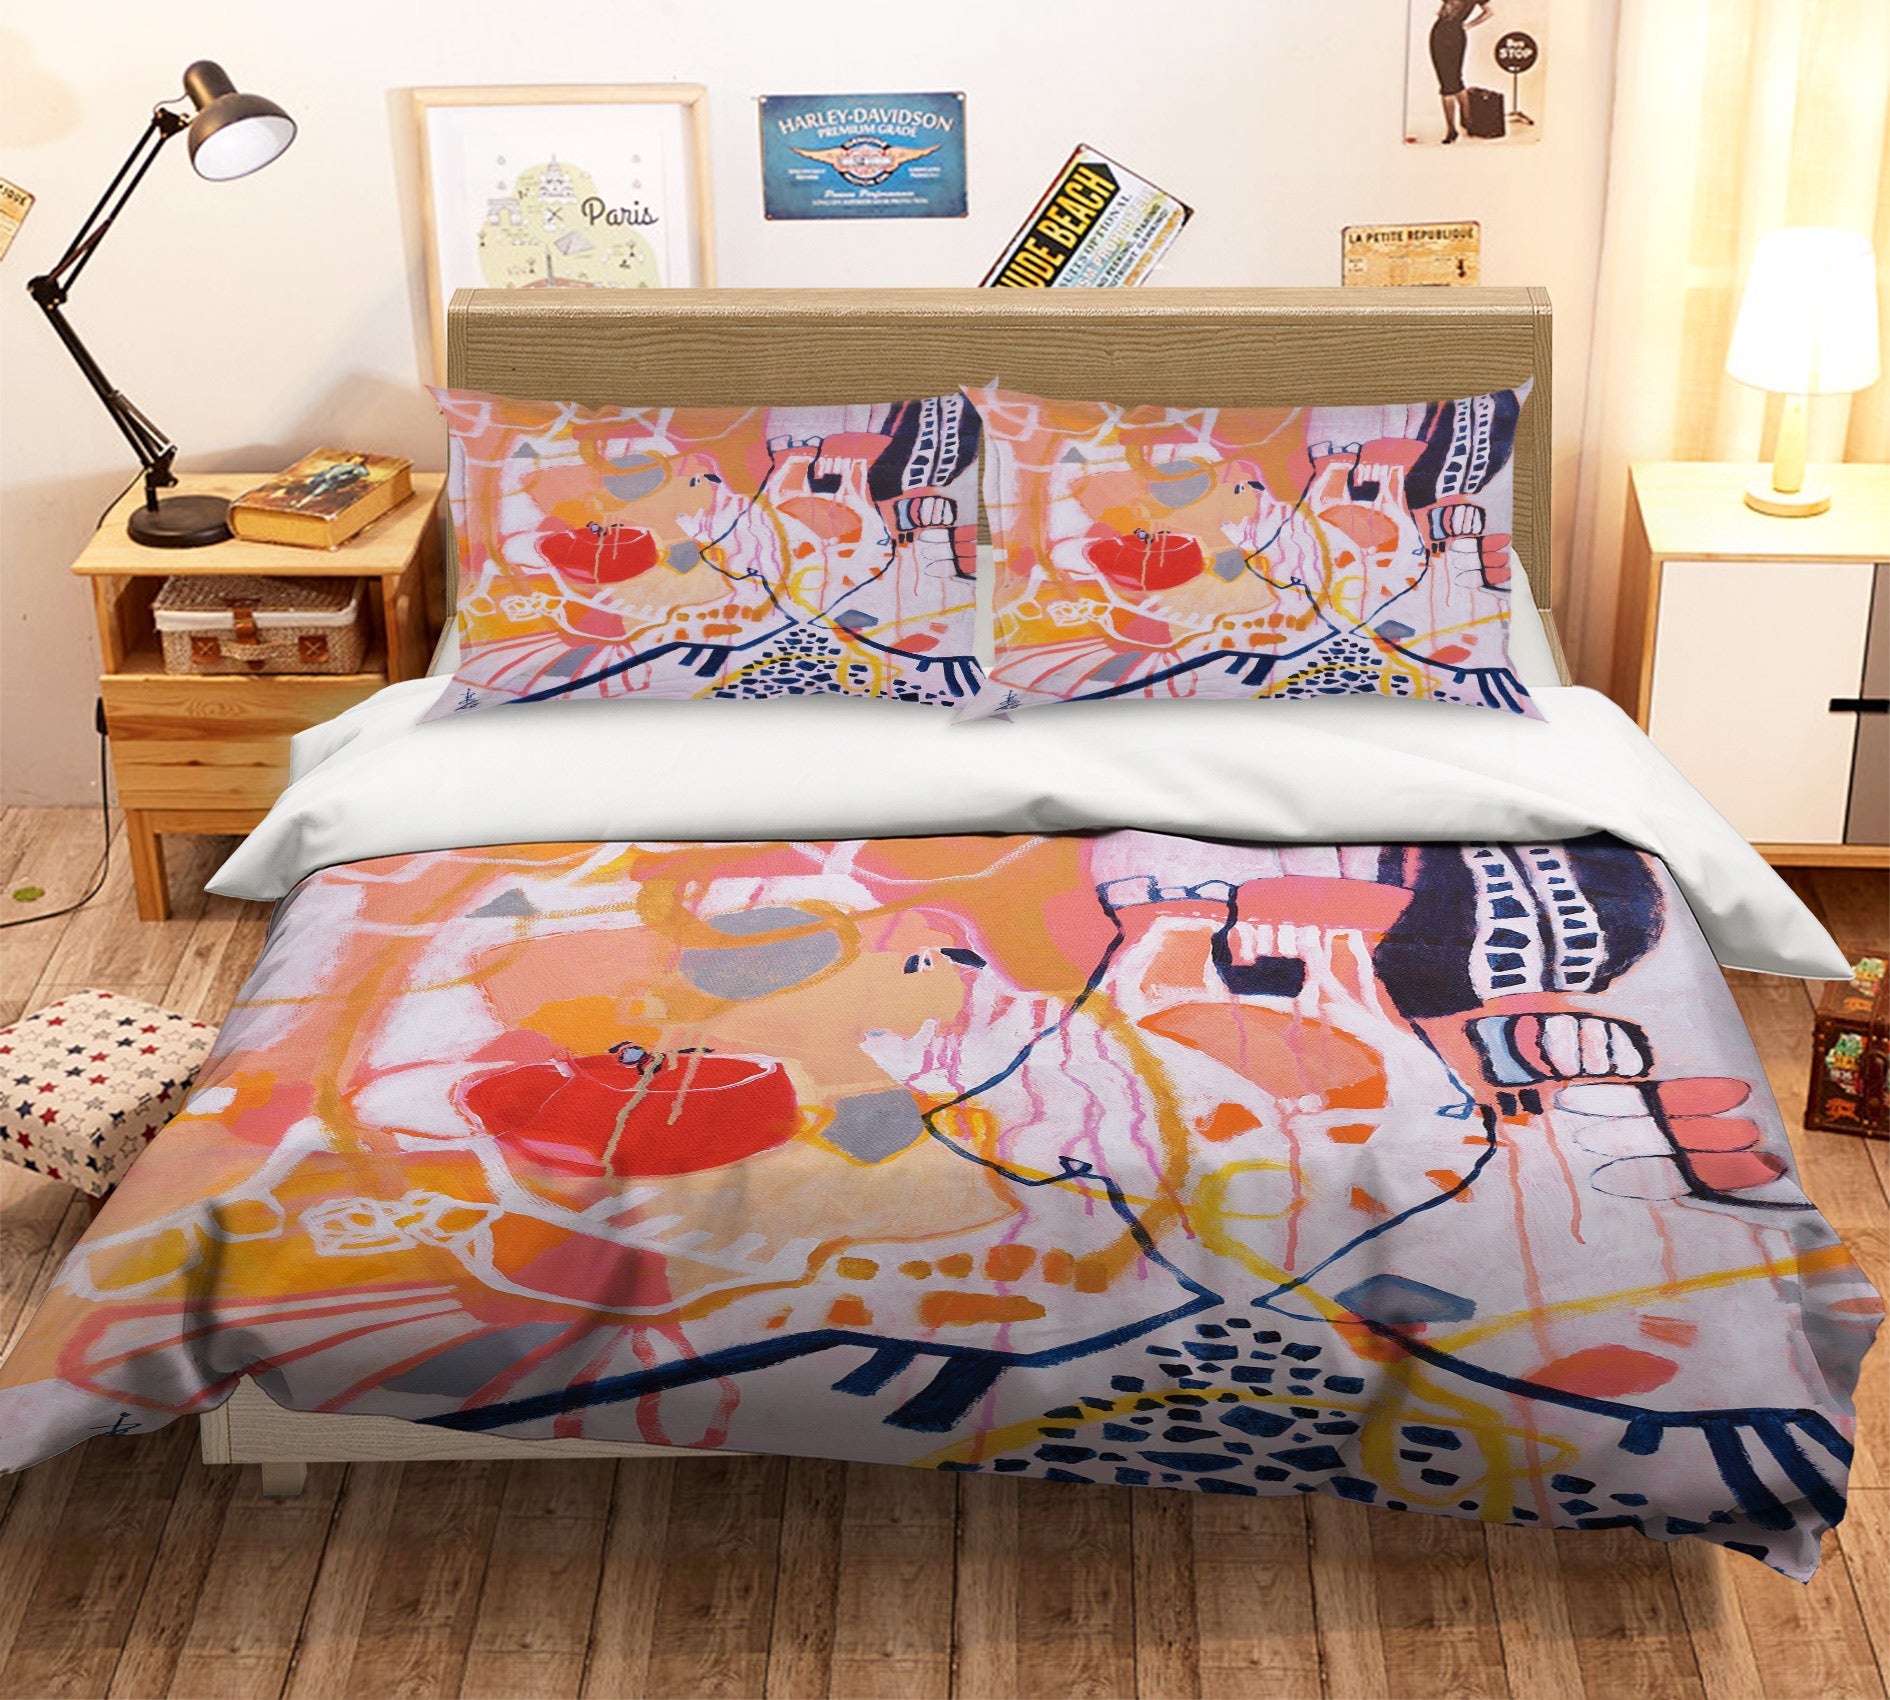 3D Cute Painting 1152 Misako Chida Bedding Bed Pillowcases Quilt Cover Duvet Cover